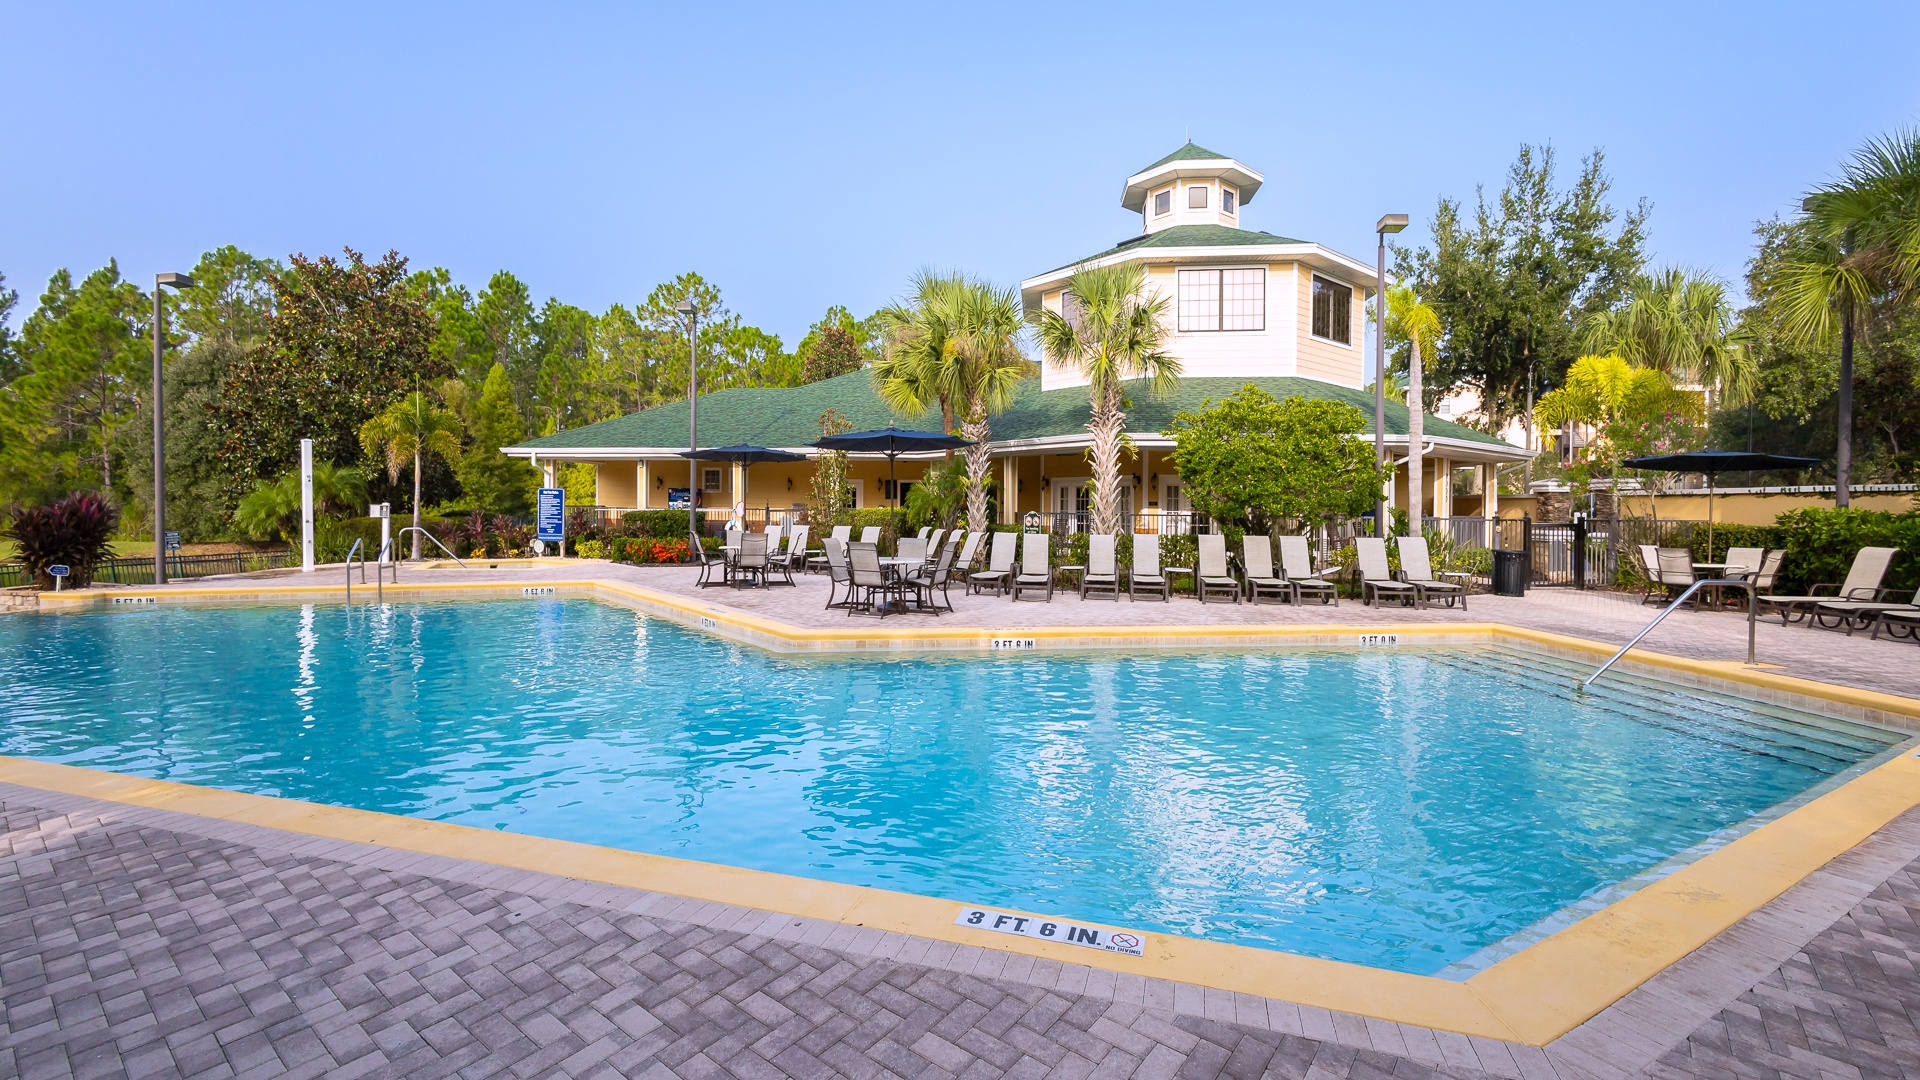 Lounge the day away or make a splash at the sparkling resort pool!